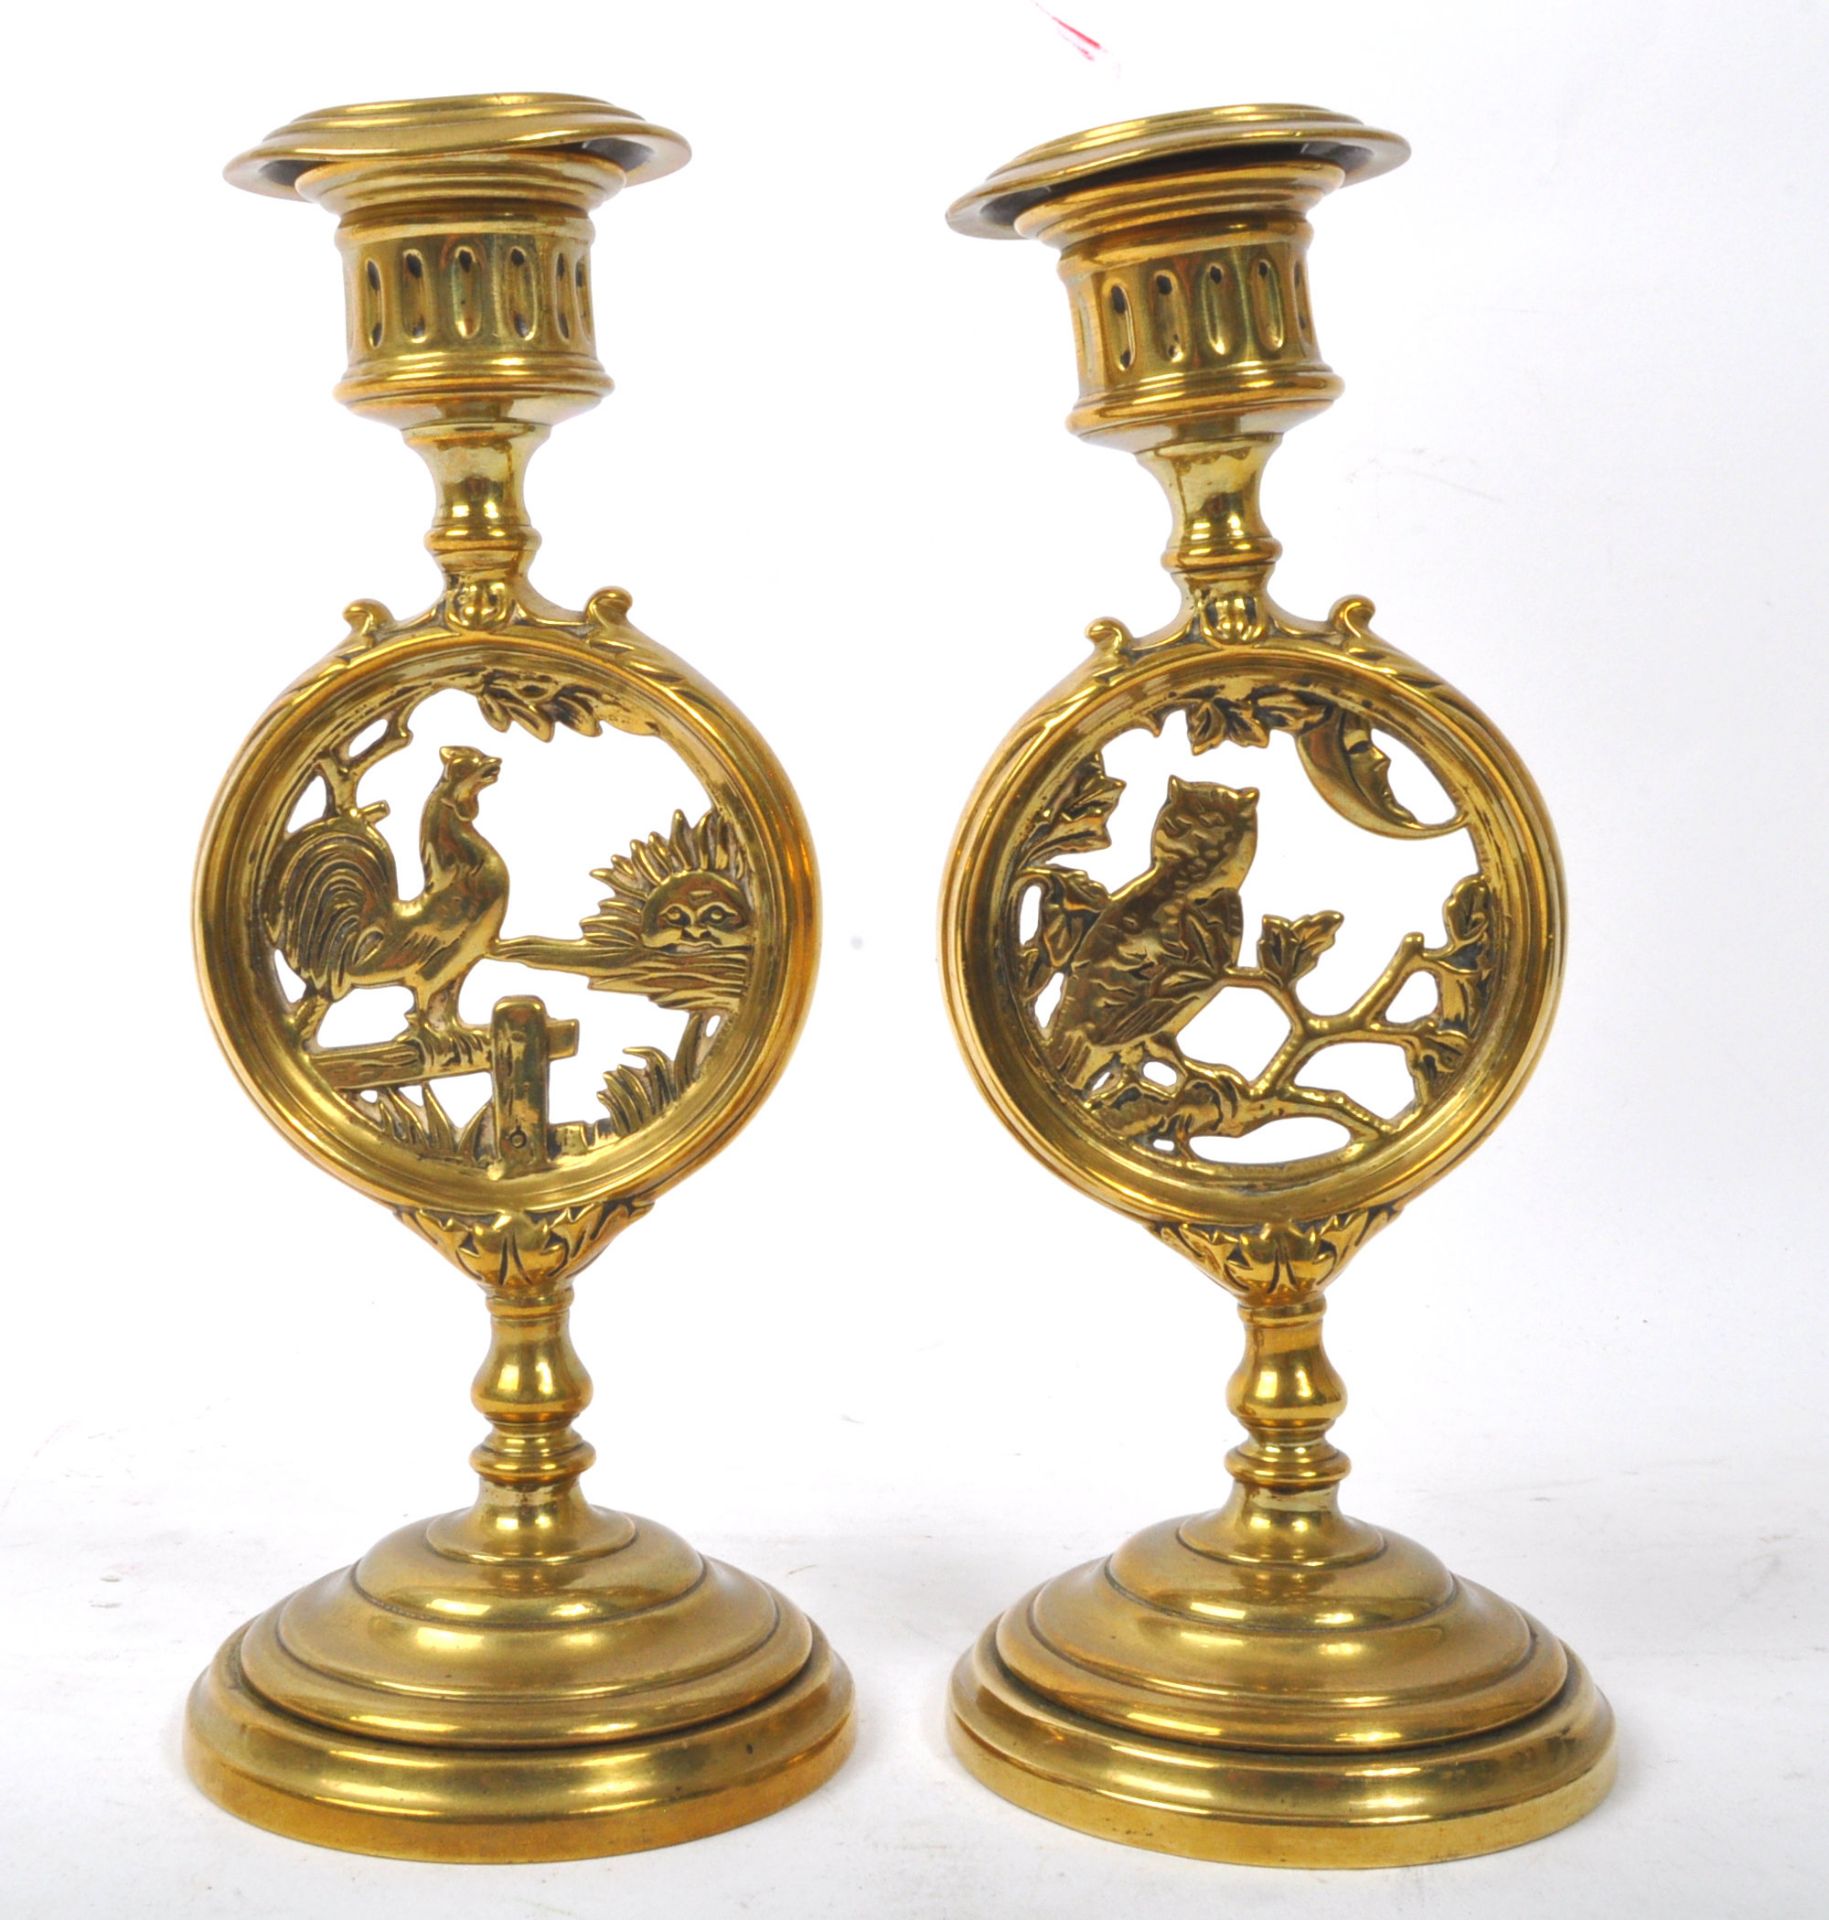 PAIR OF VICTORIAN BRASS DAY & NIGHT CANDLESTICK HOLDERS